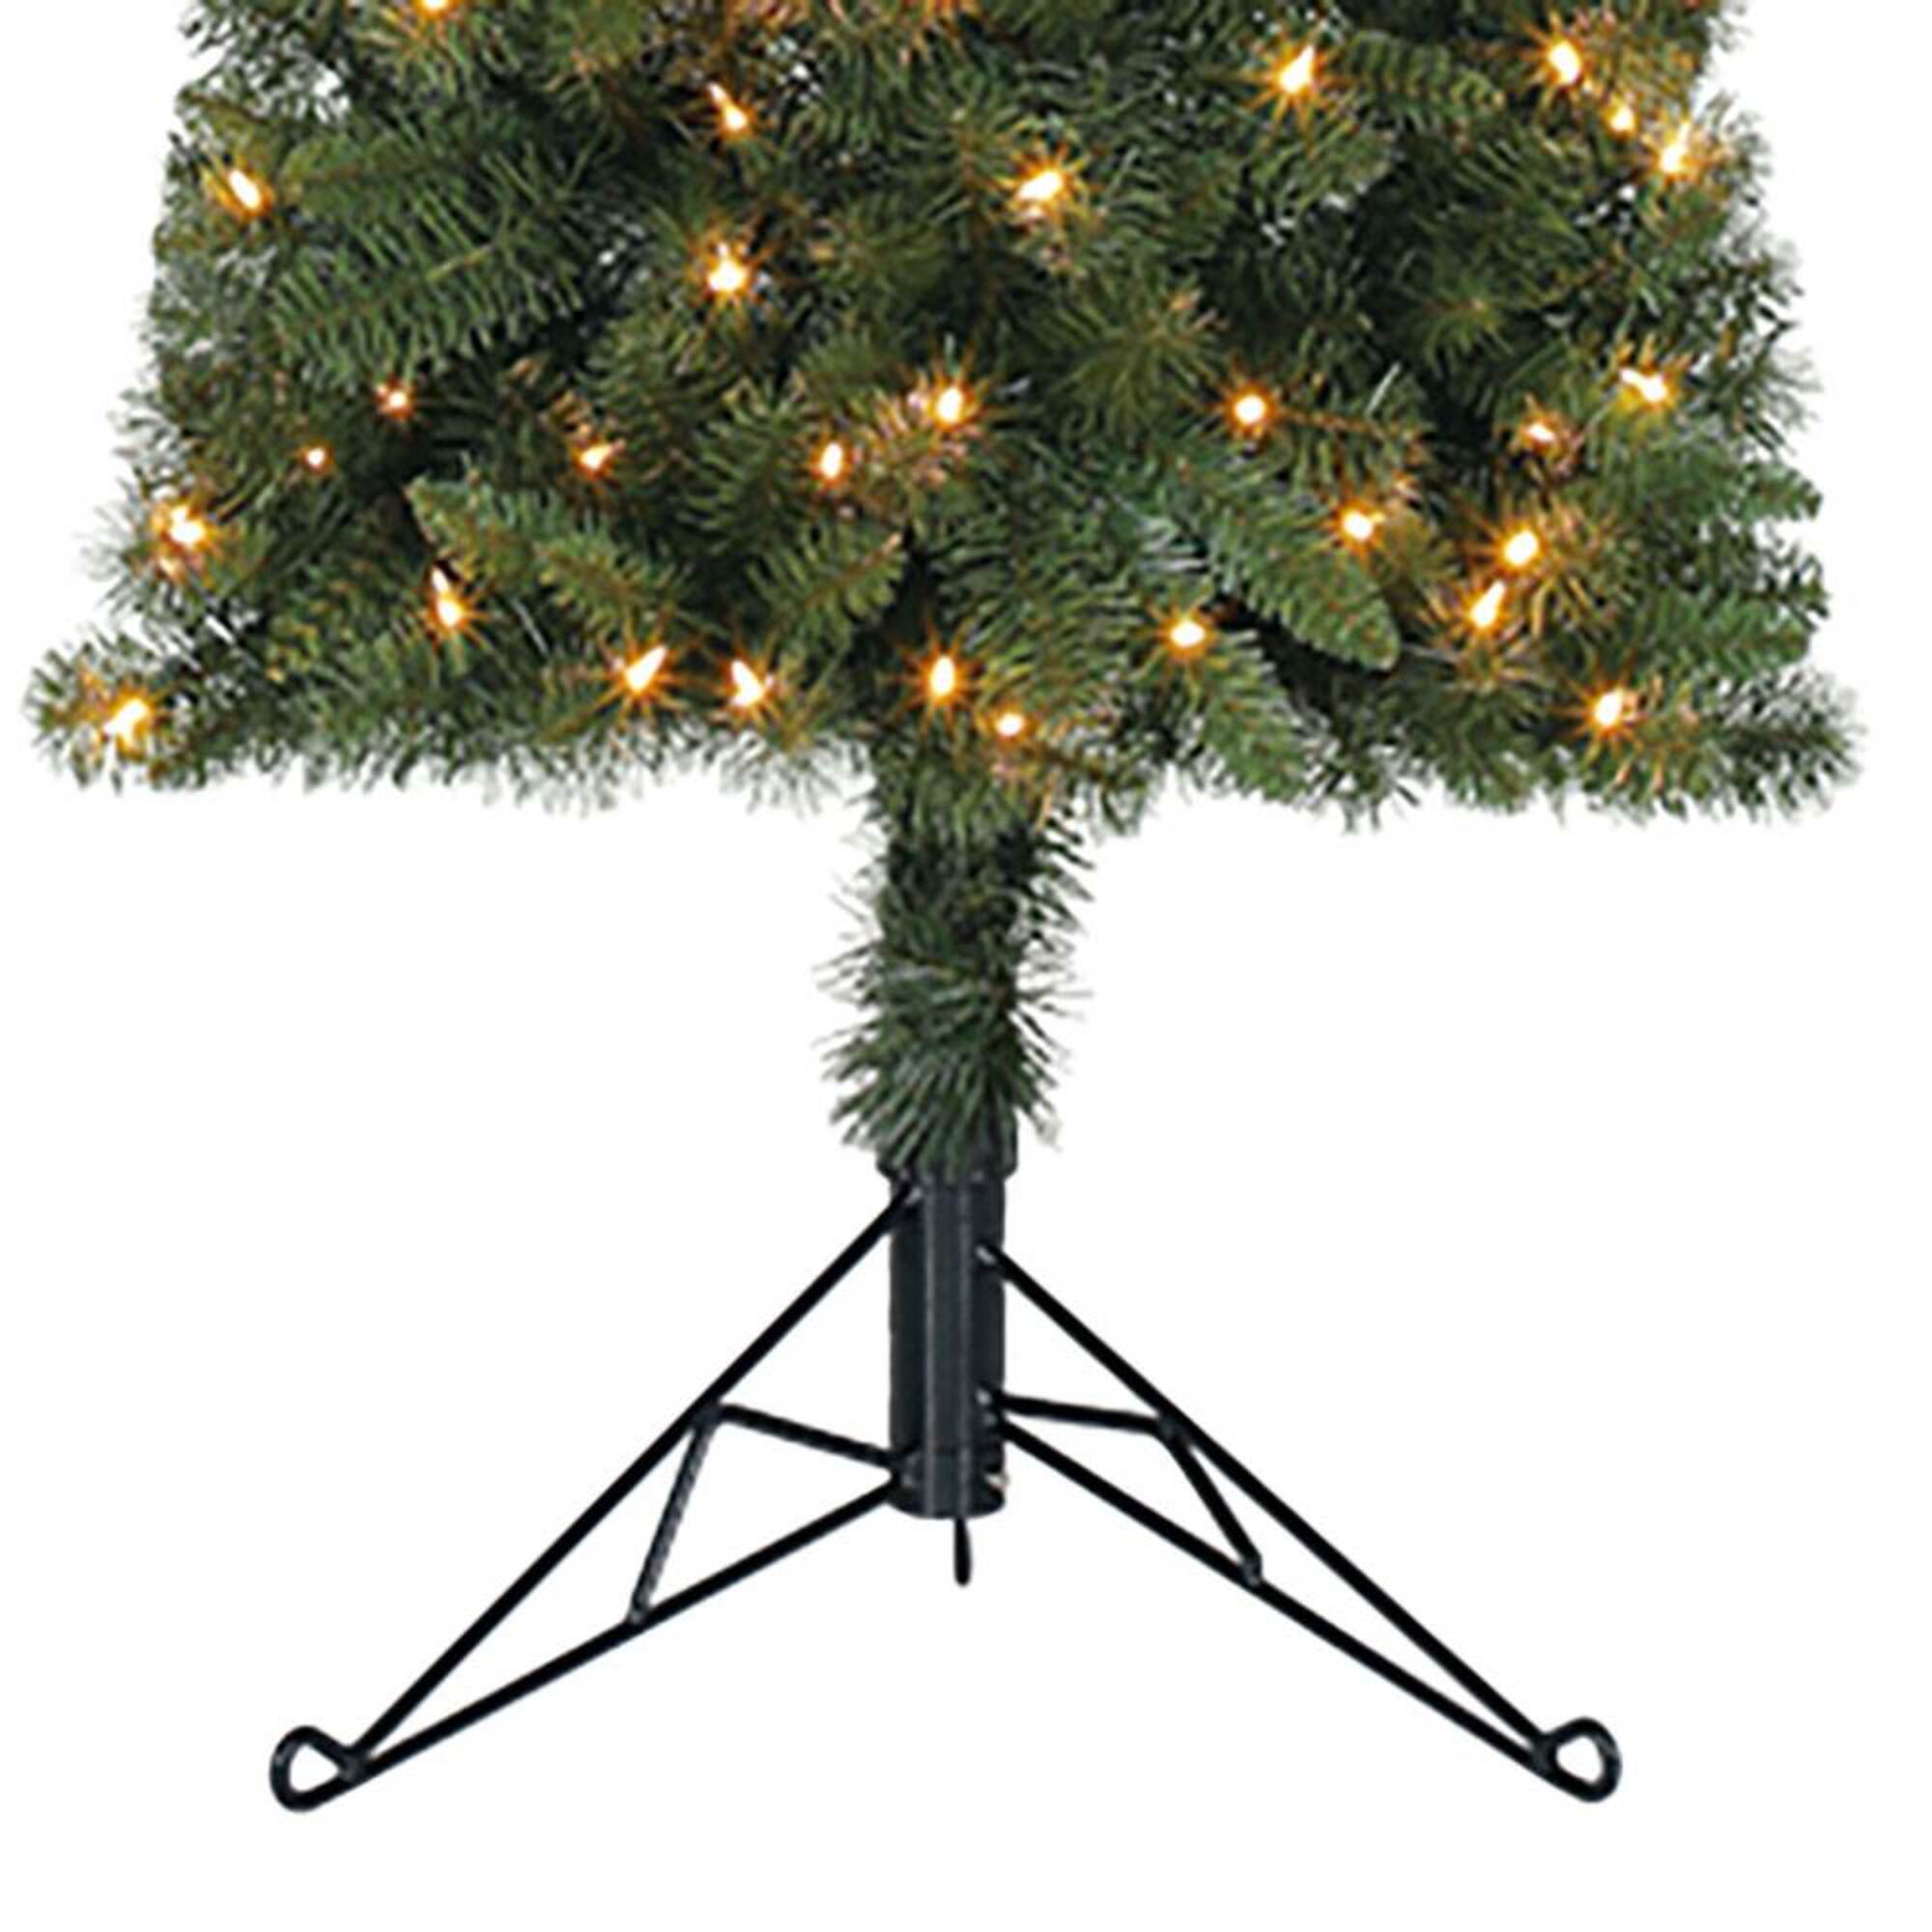 Home Heritage 7-ft Pre-lit Slim Artificial Christmas Tree with LED ...